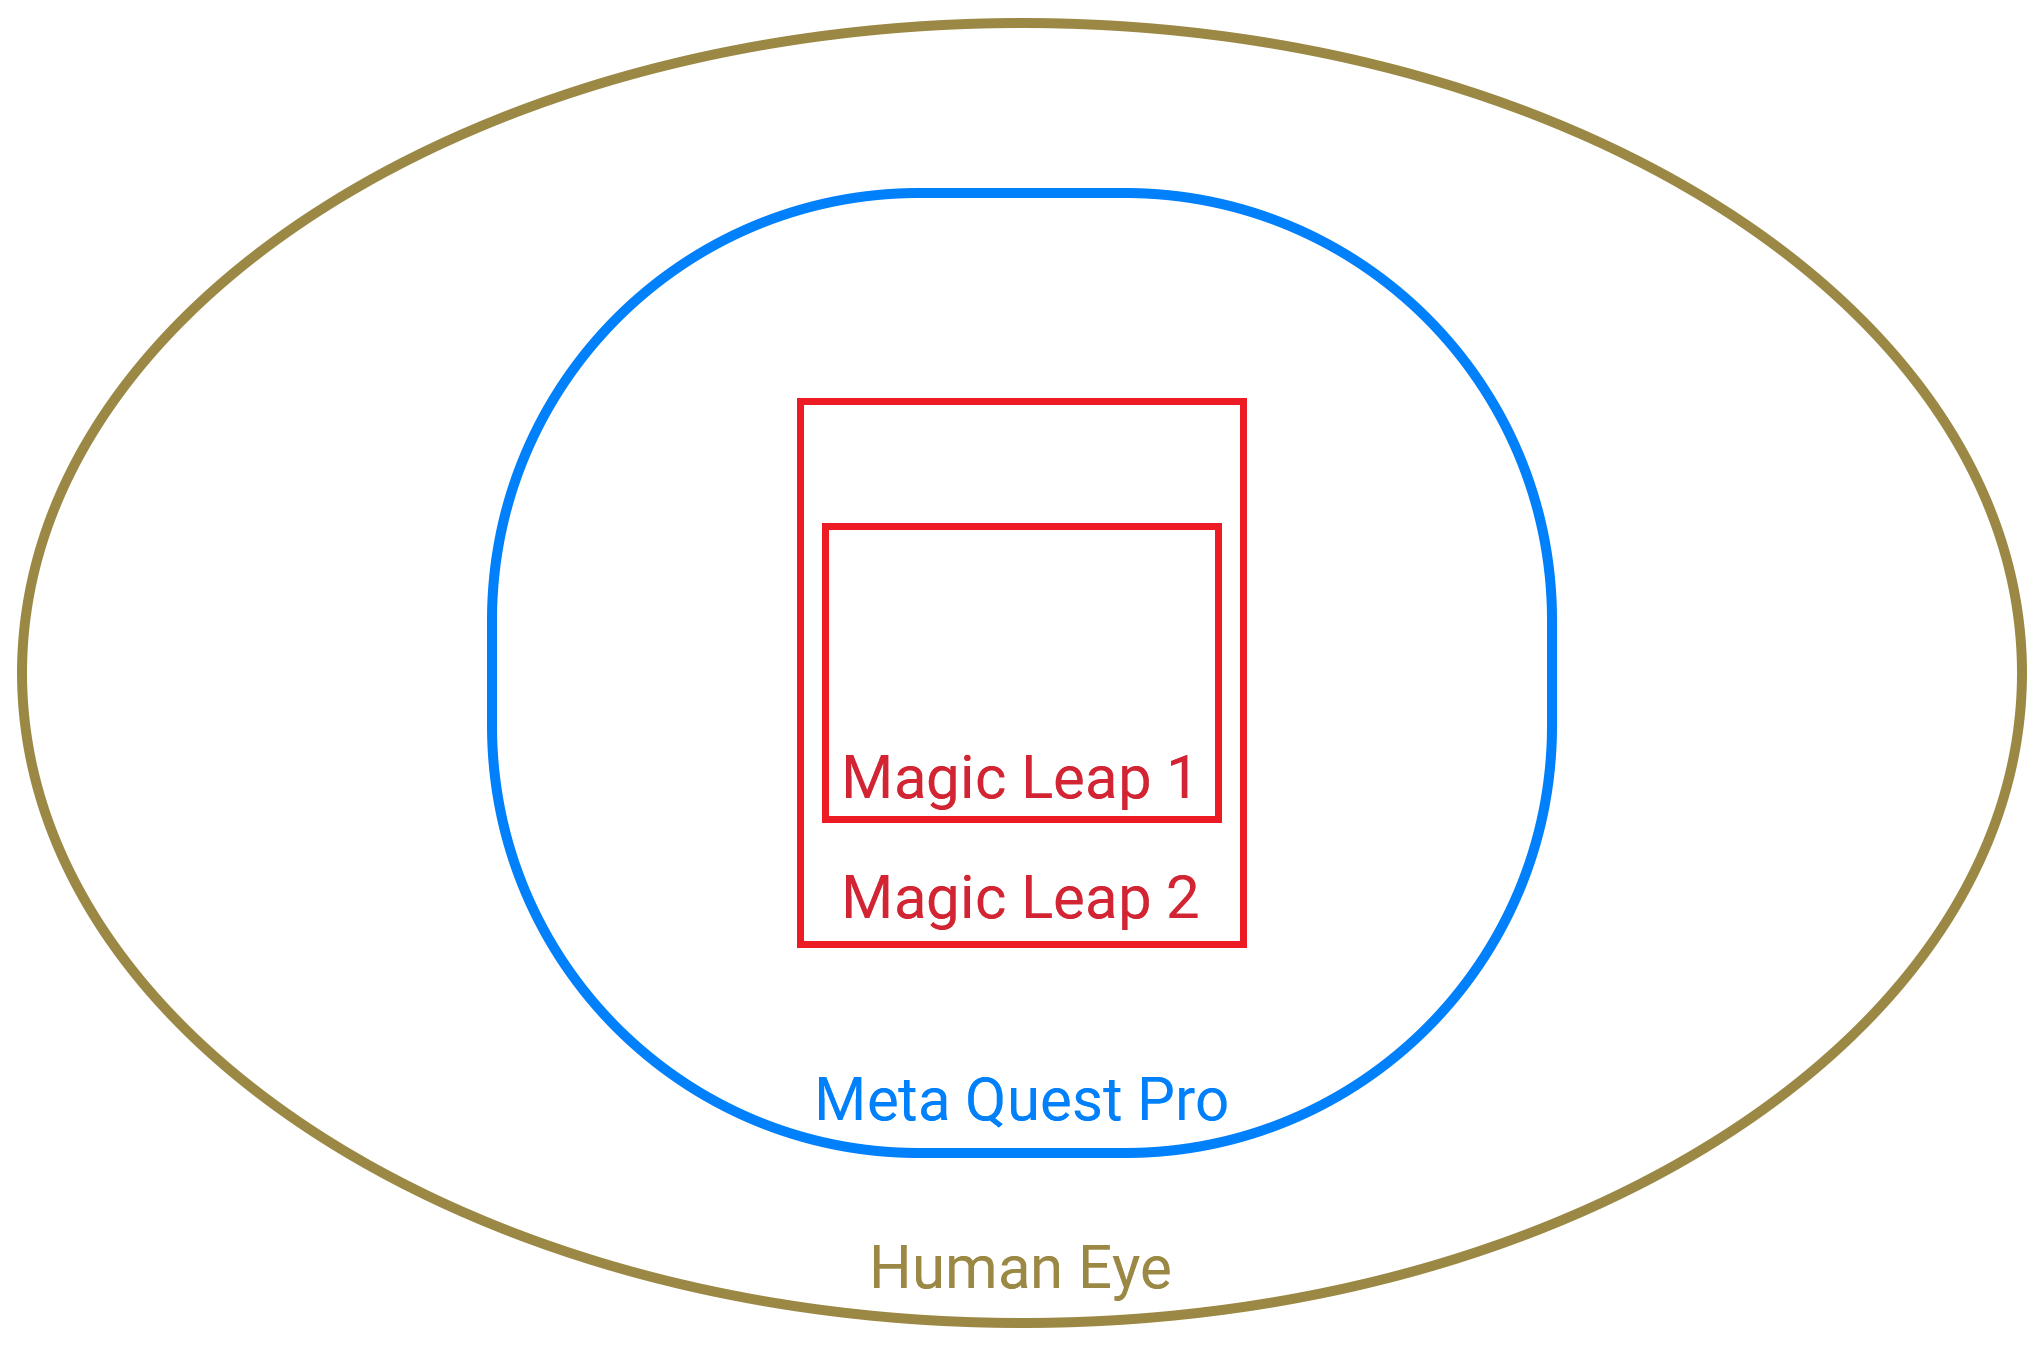 Visualization of the field of view of Magic Leap transparent AR headsets.